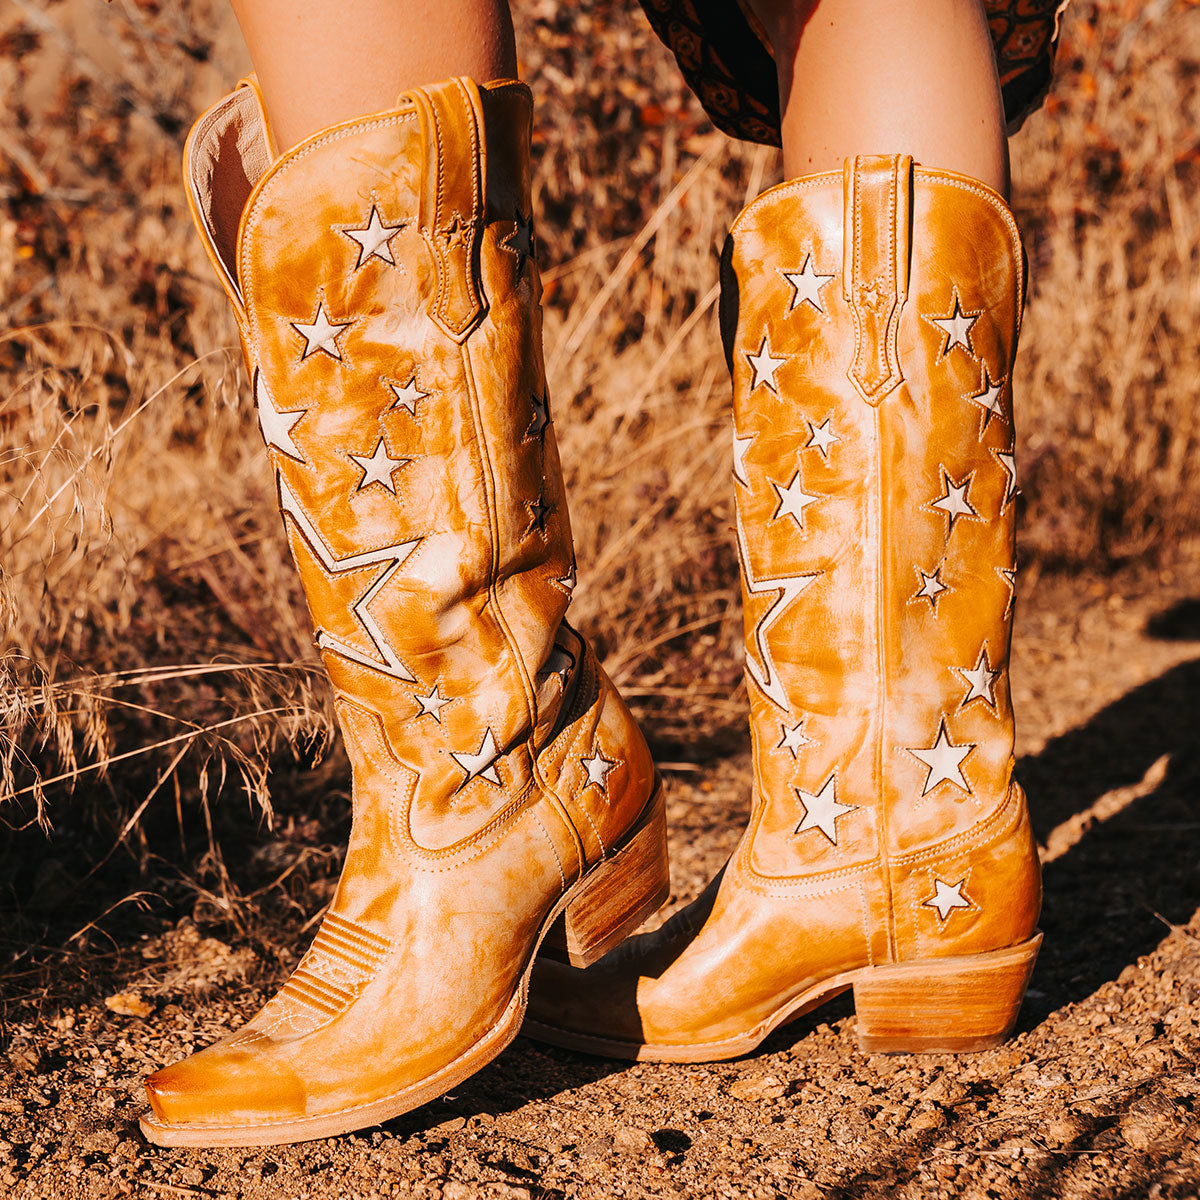 FREEBIRD women's Starzz banana leather cowboy boot with two-toned leather star inlay detailing traditional stitching and snip toe construction